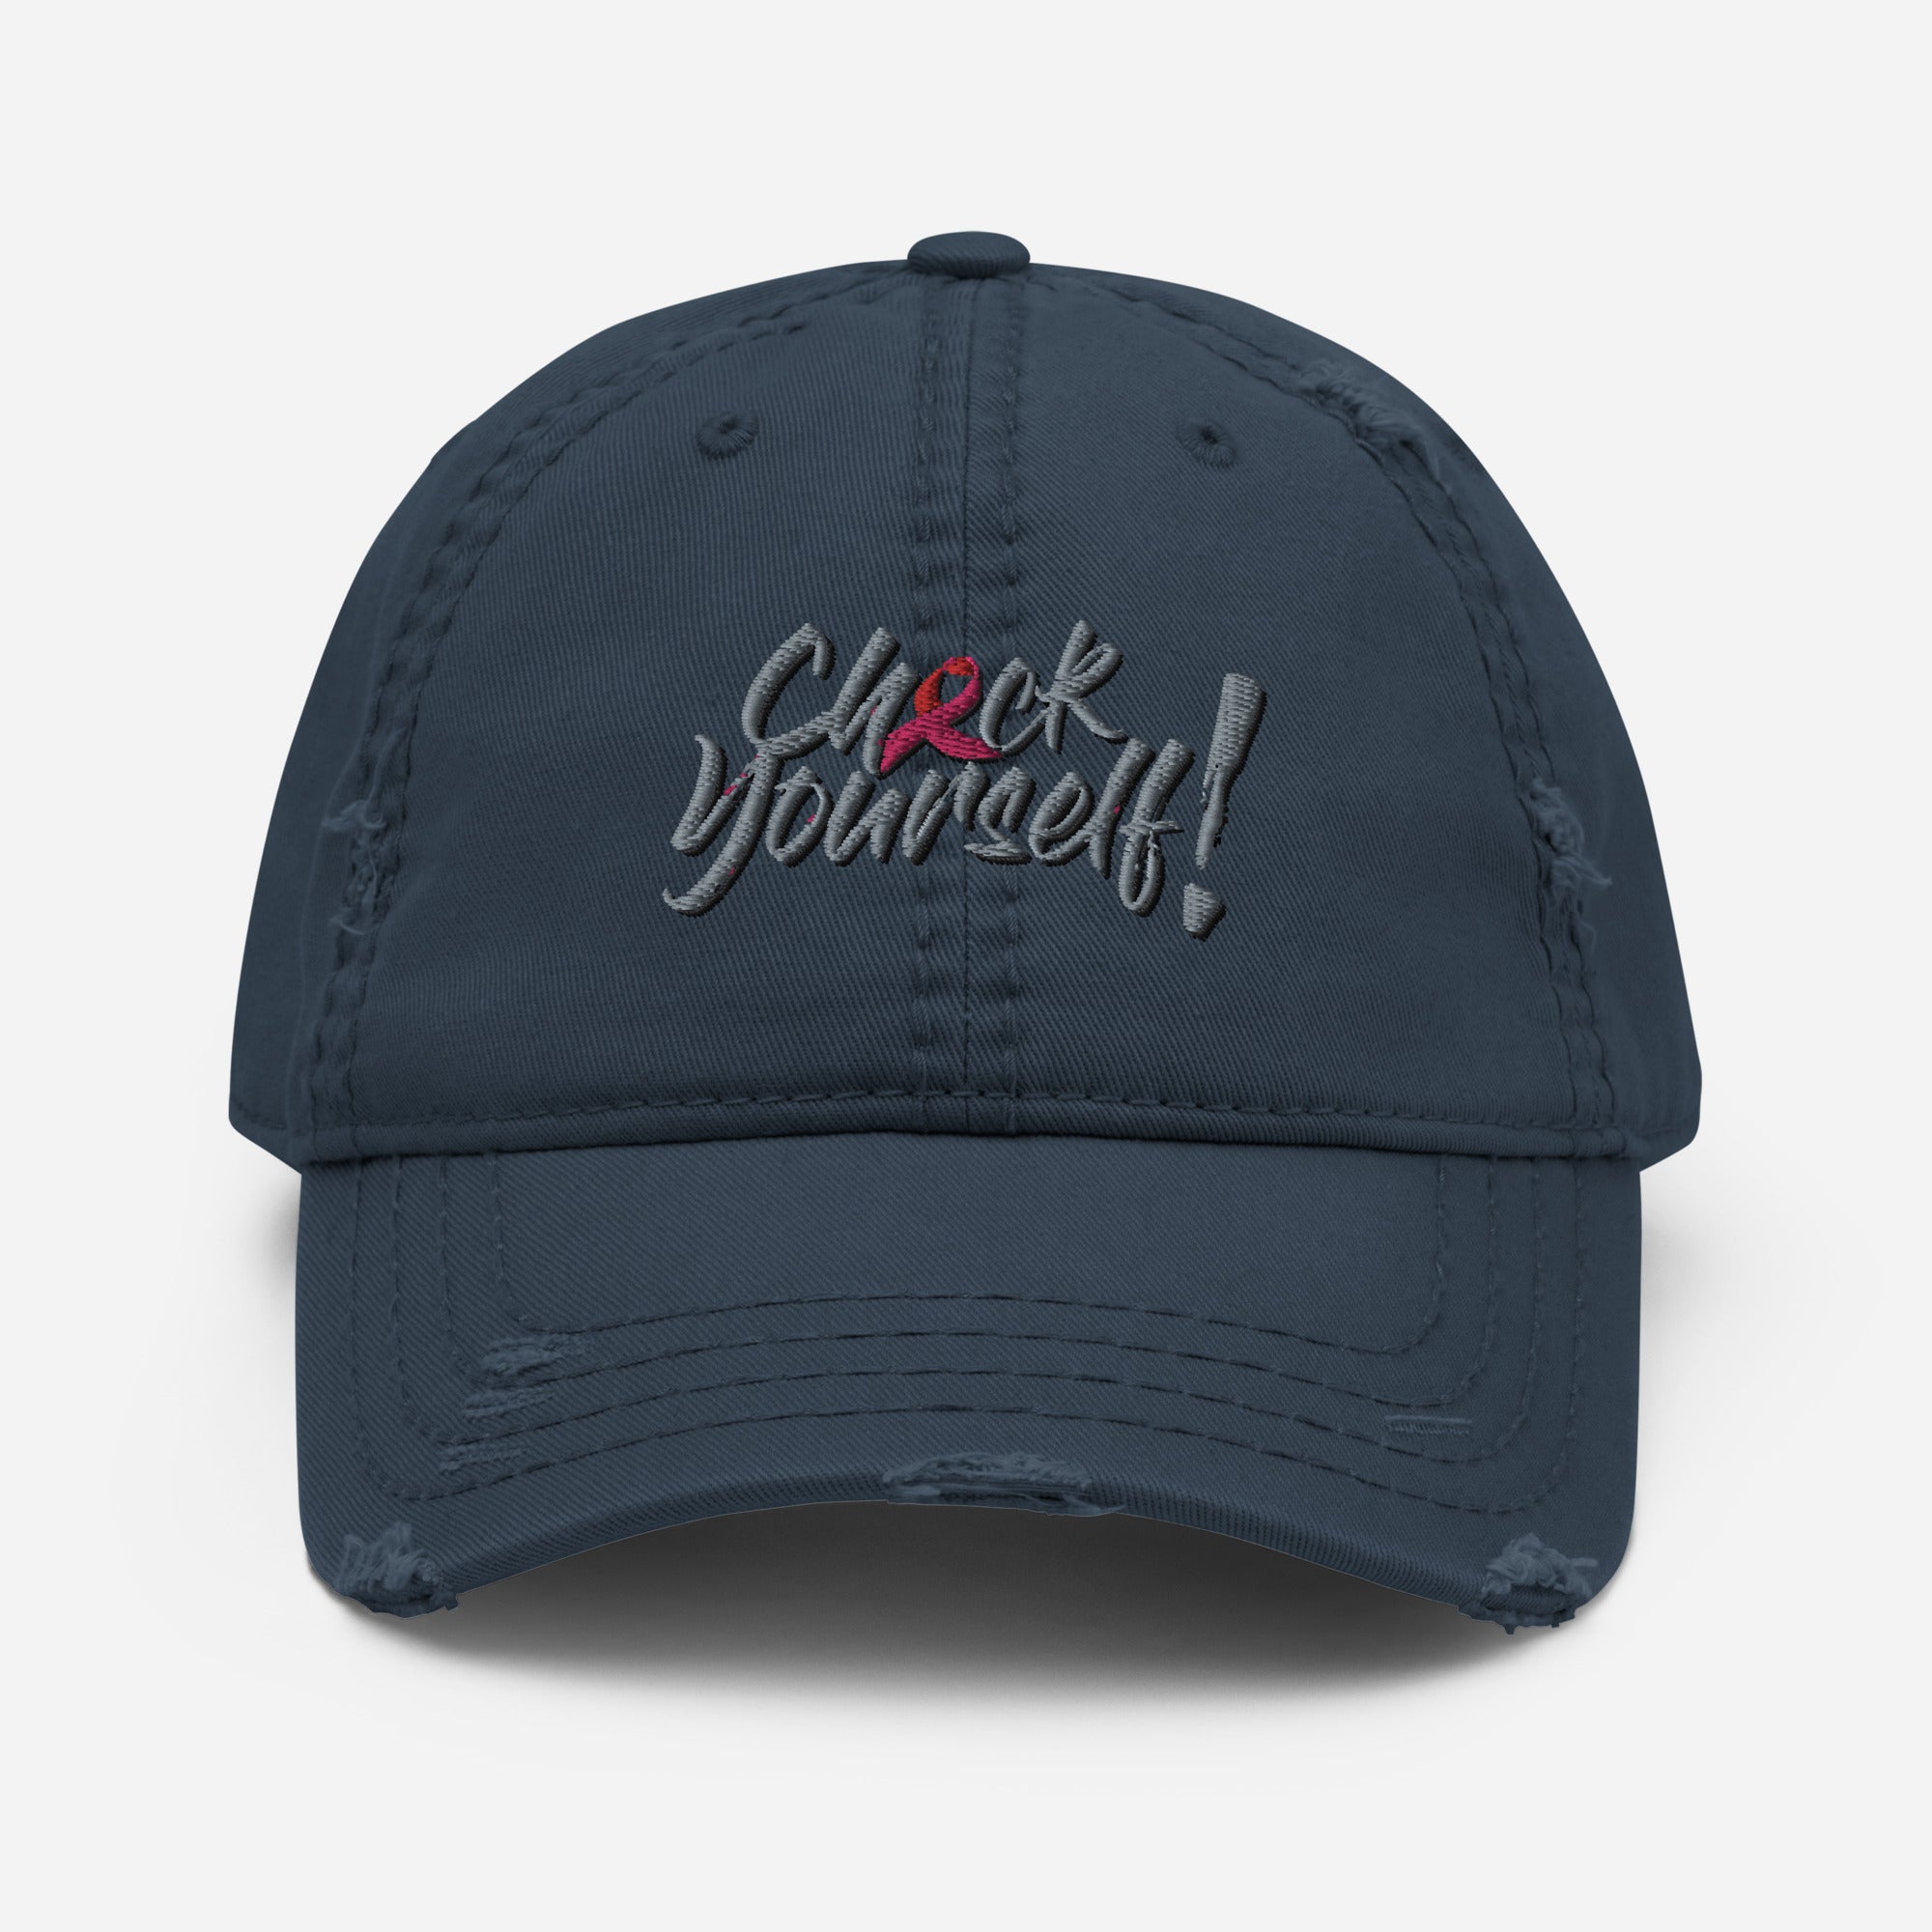 Check Yourself - Vintage Distressed Cap